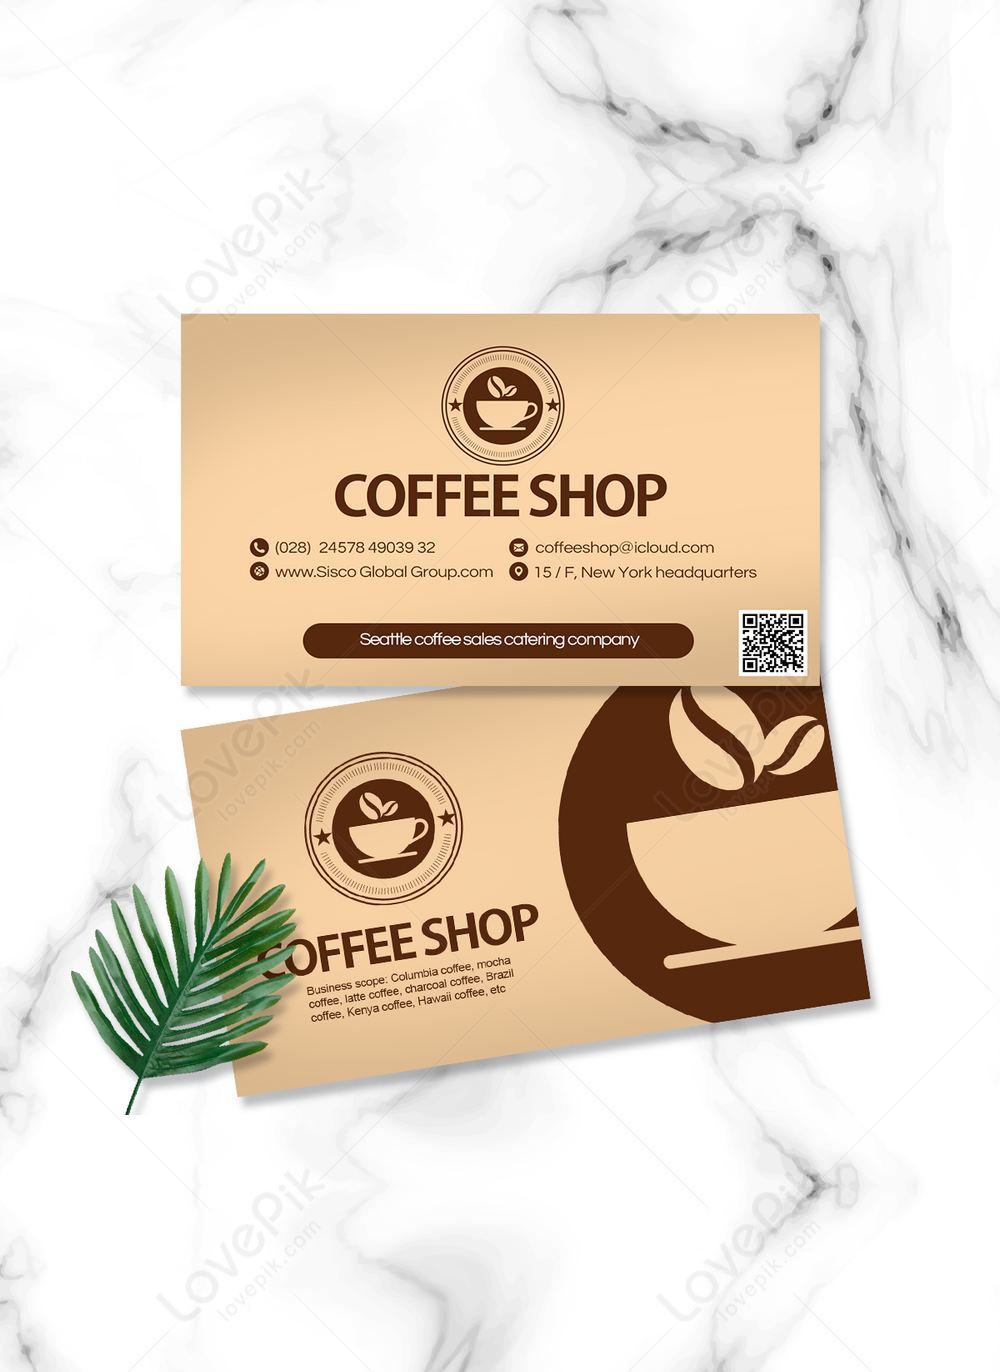 Coffee house business card design template image_picture free Regarding Coffee Business Card Template Free